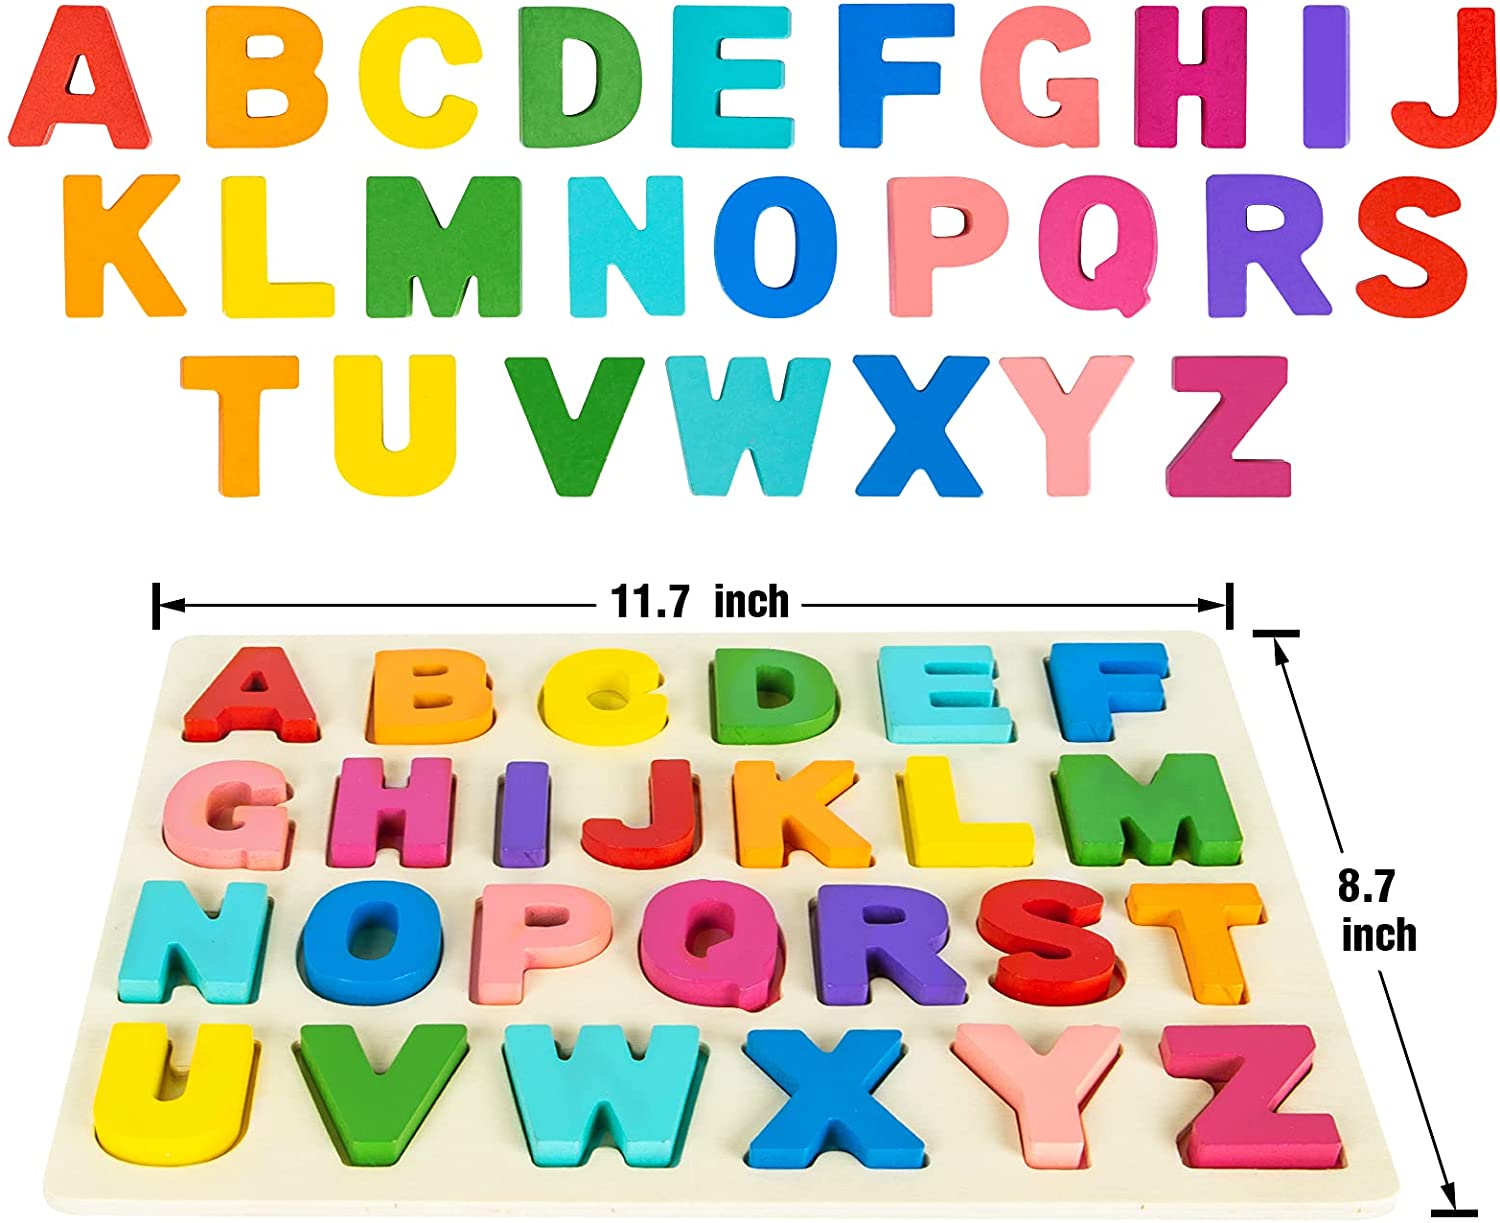 Uppercase Letters ABC Puzzles Board for Preschools Boys and Girls